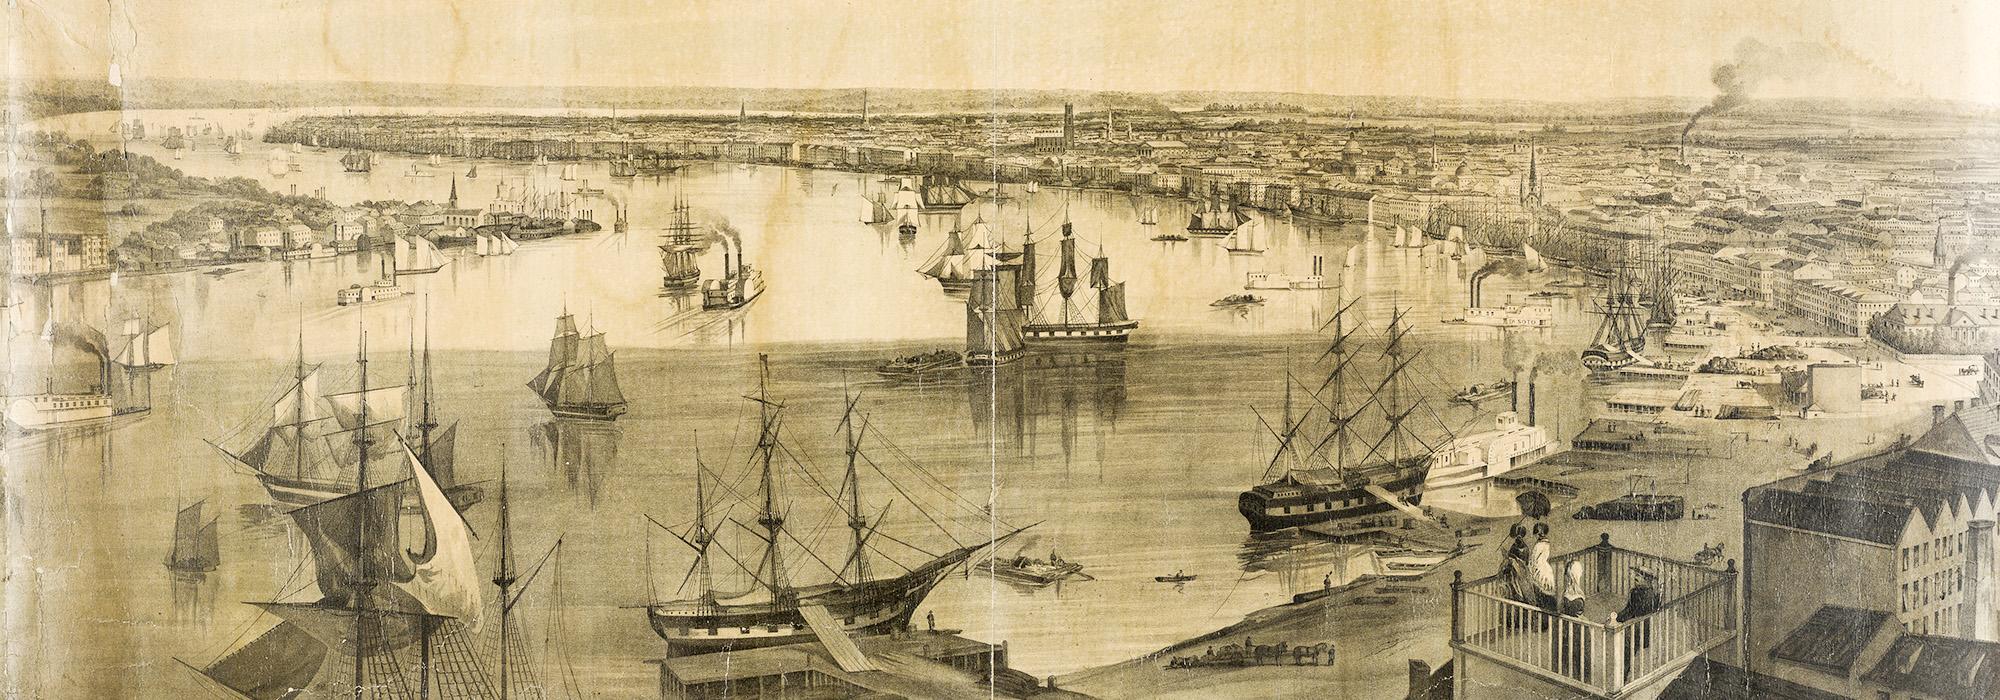 New Orleans from the lower cotton press 1852